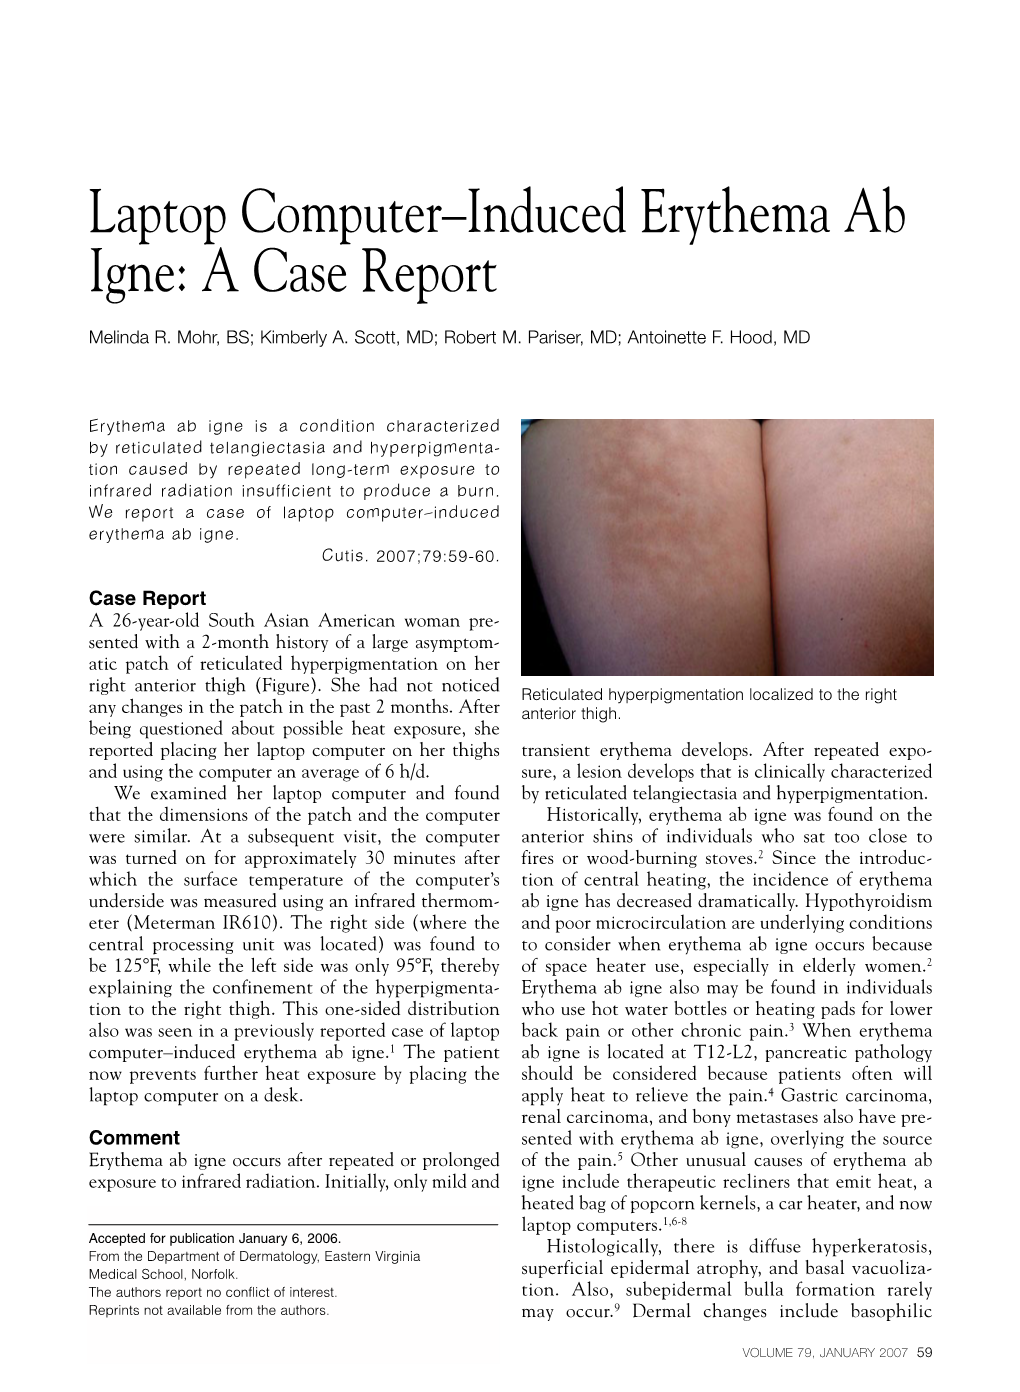 Laptop Computer–Induced Erythema Ab Igne: a Case Report